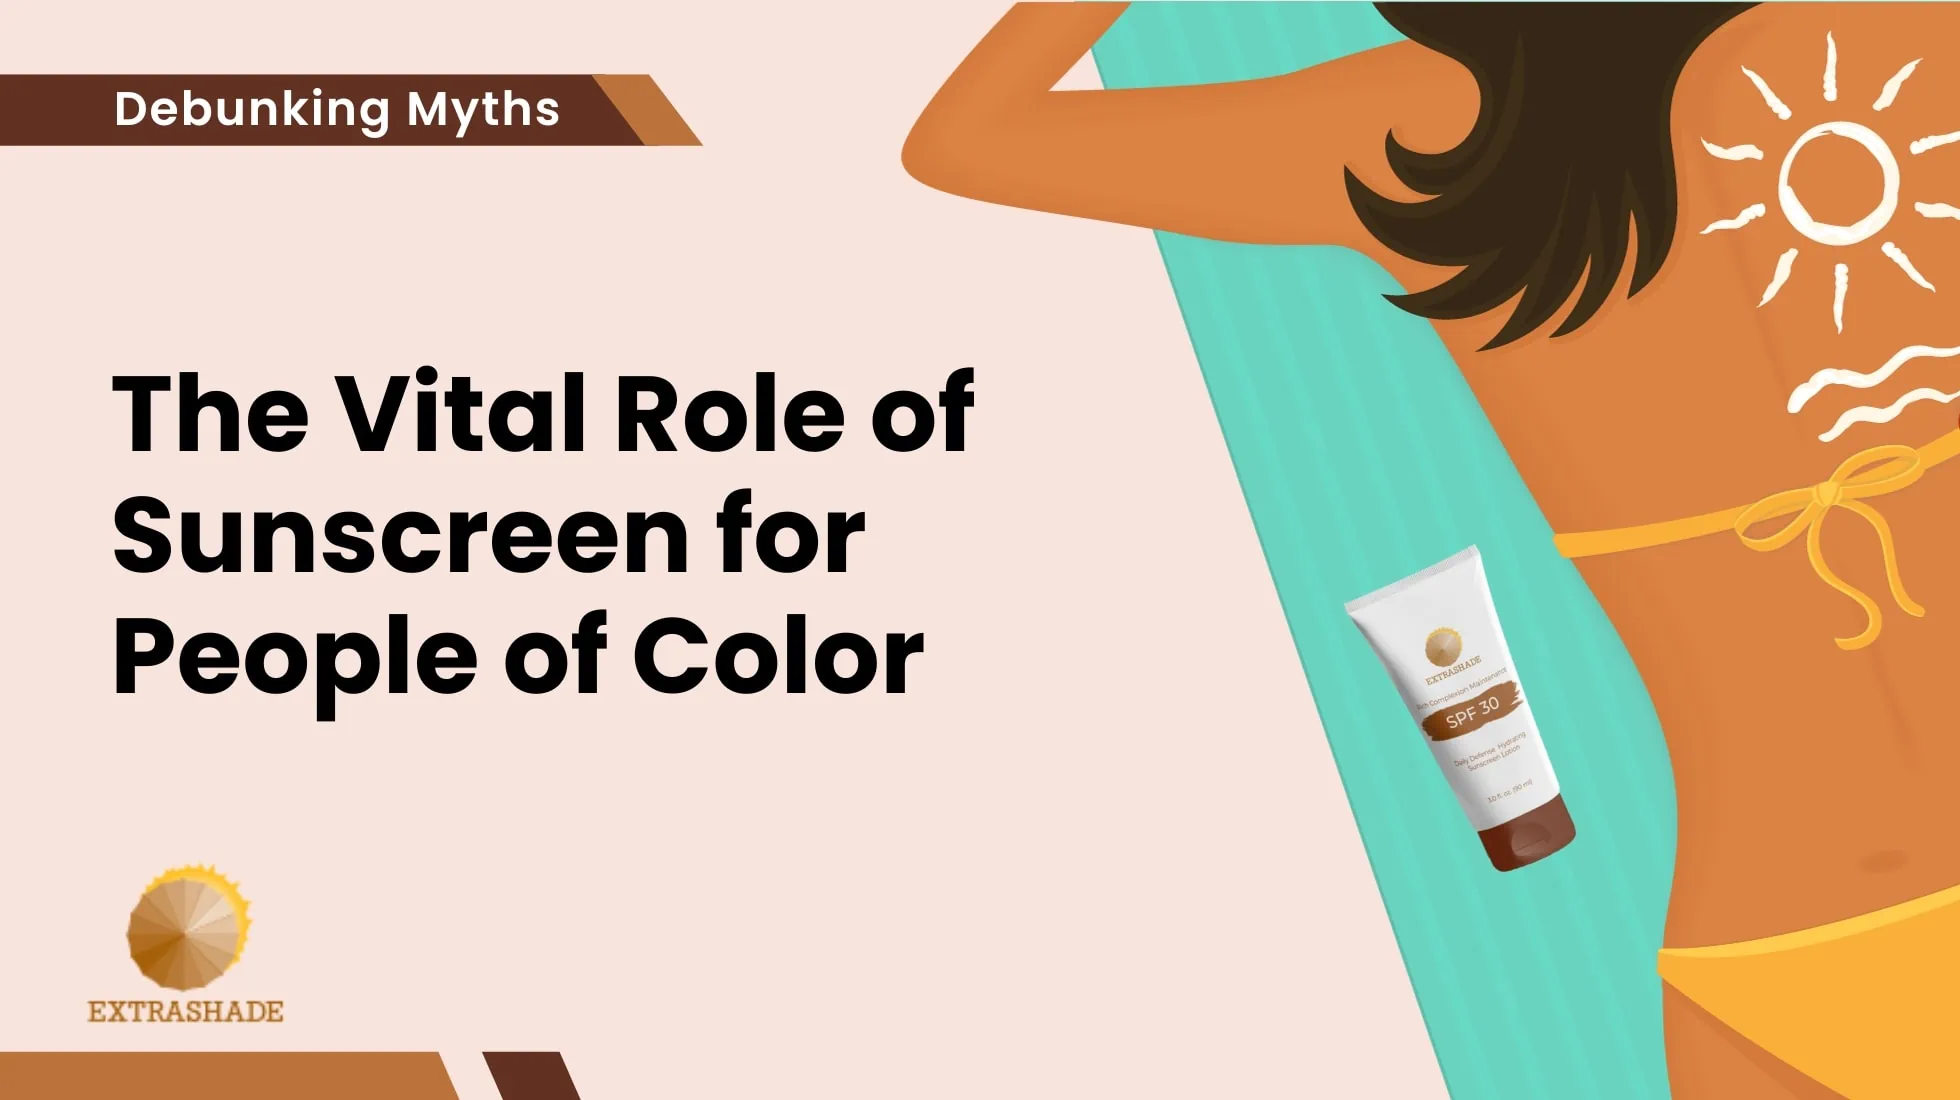 Debunking Myths The Vital Role of Sunscreen for People of Color